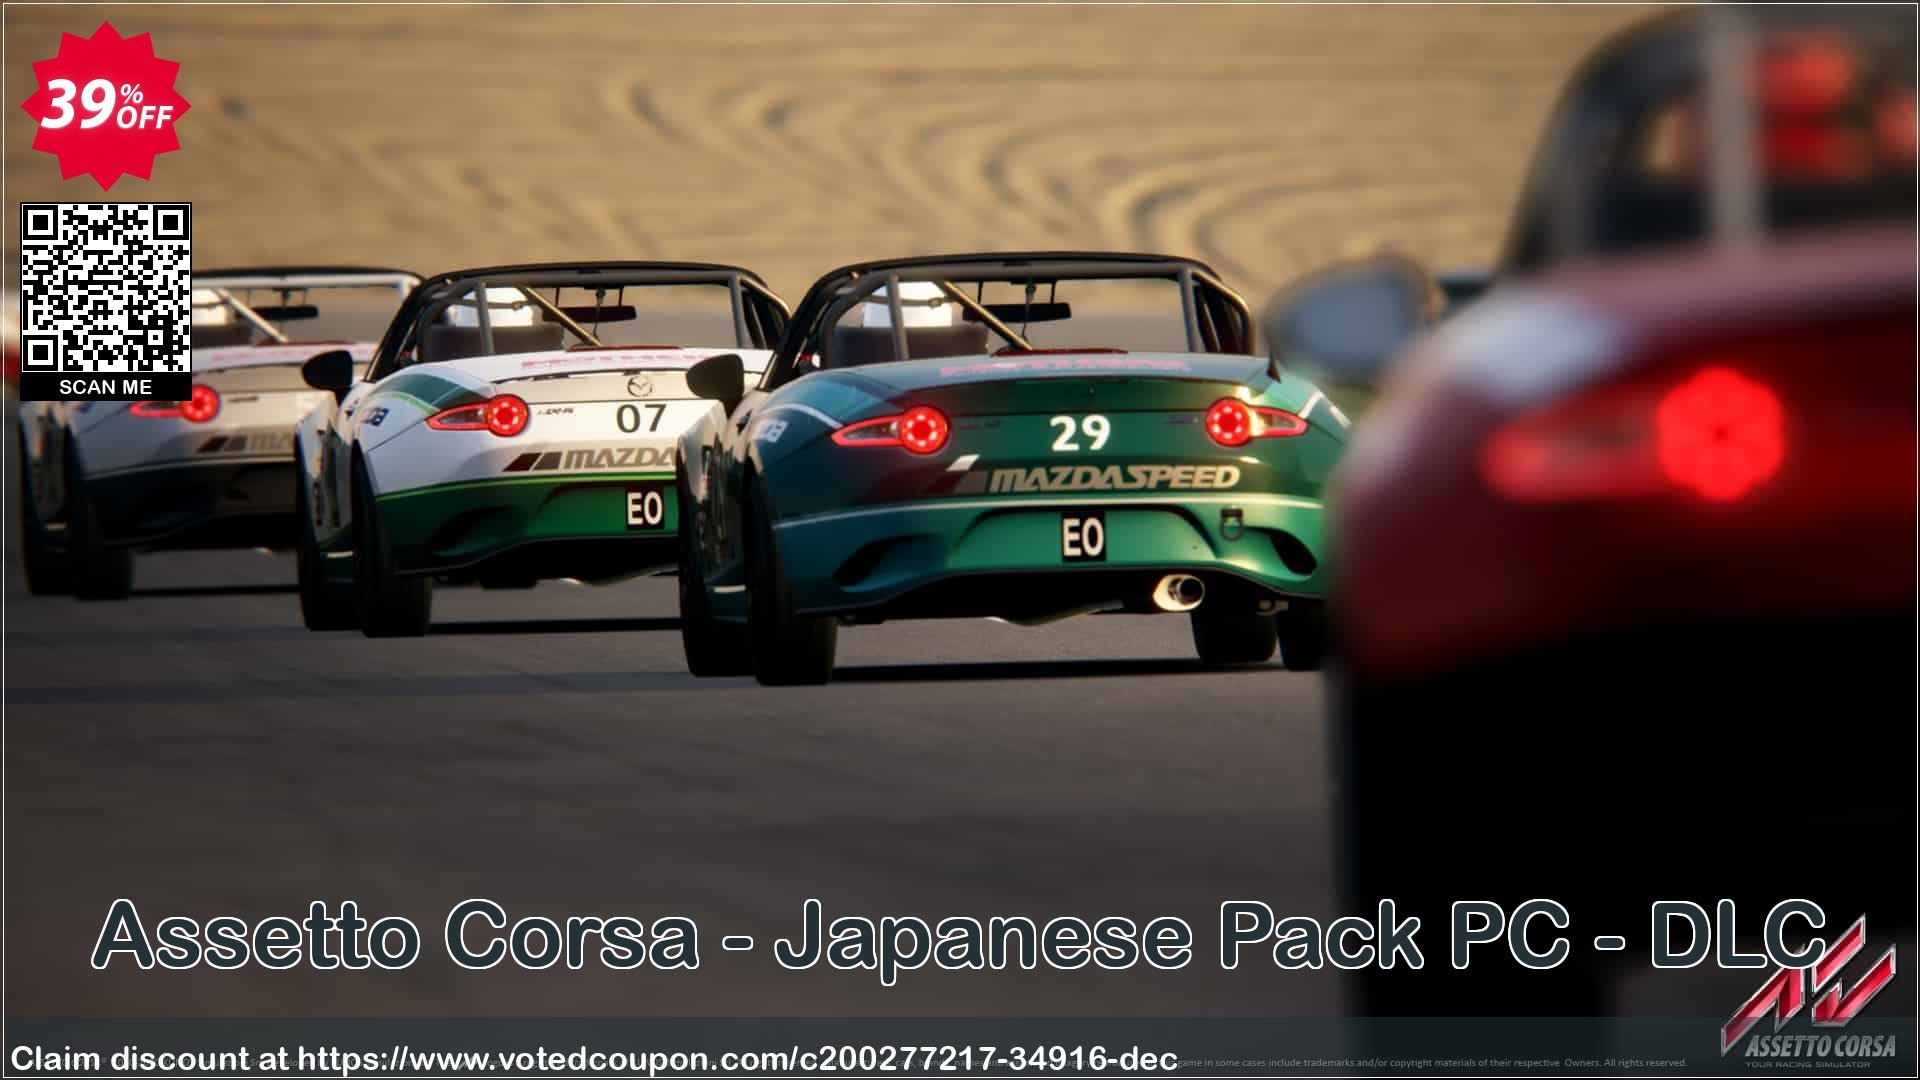 Assetto Corsa - Japanese Pack PC - DLC Coupon Code May 2024, 39% OFF - VotedCoupon